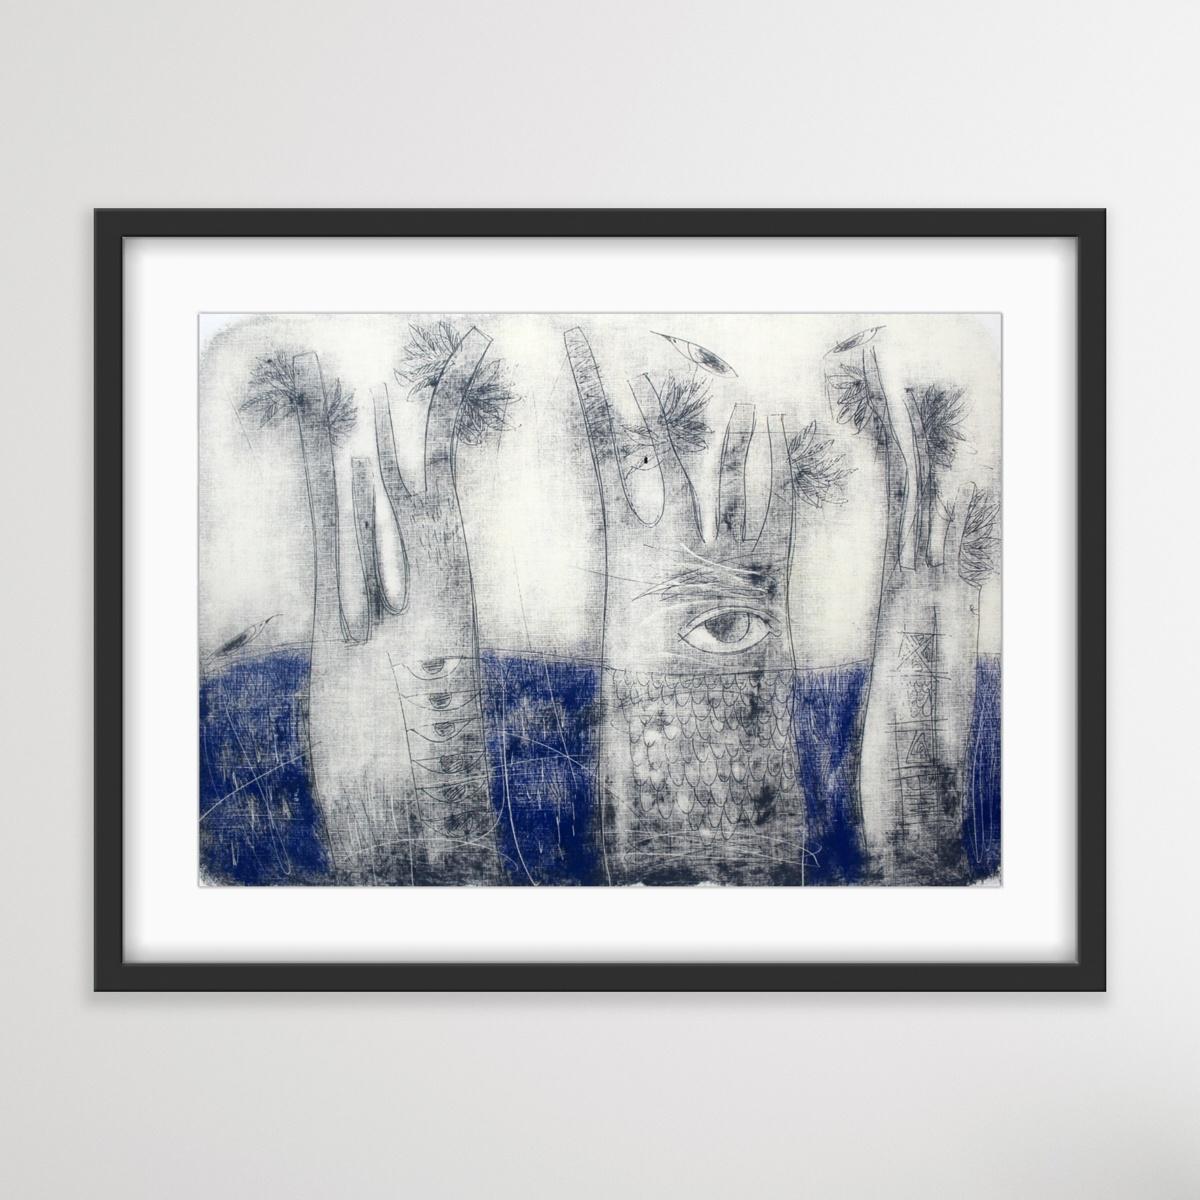 Landscape with trees - XXI Century, Figurative Monotype Print, Surreal For Sale 2